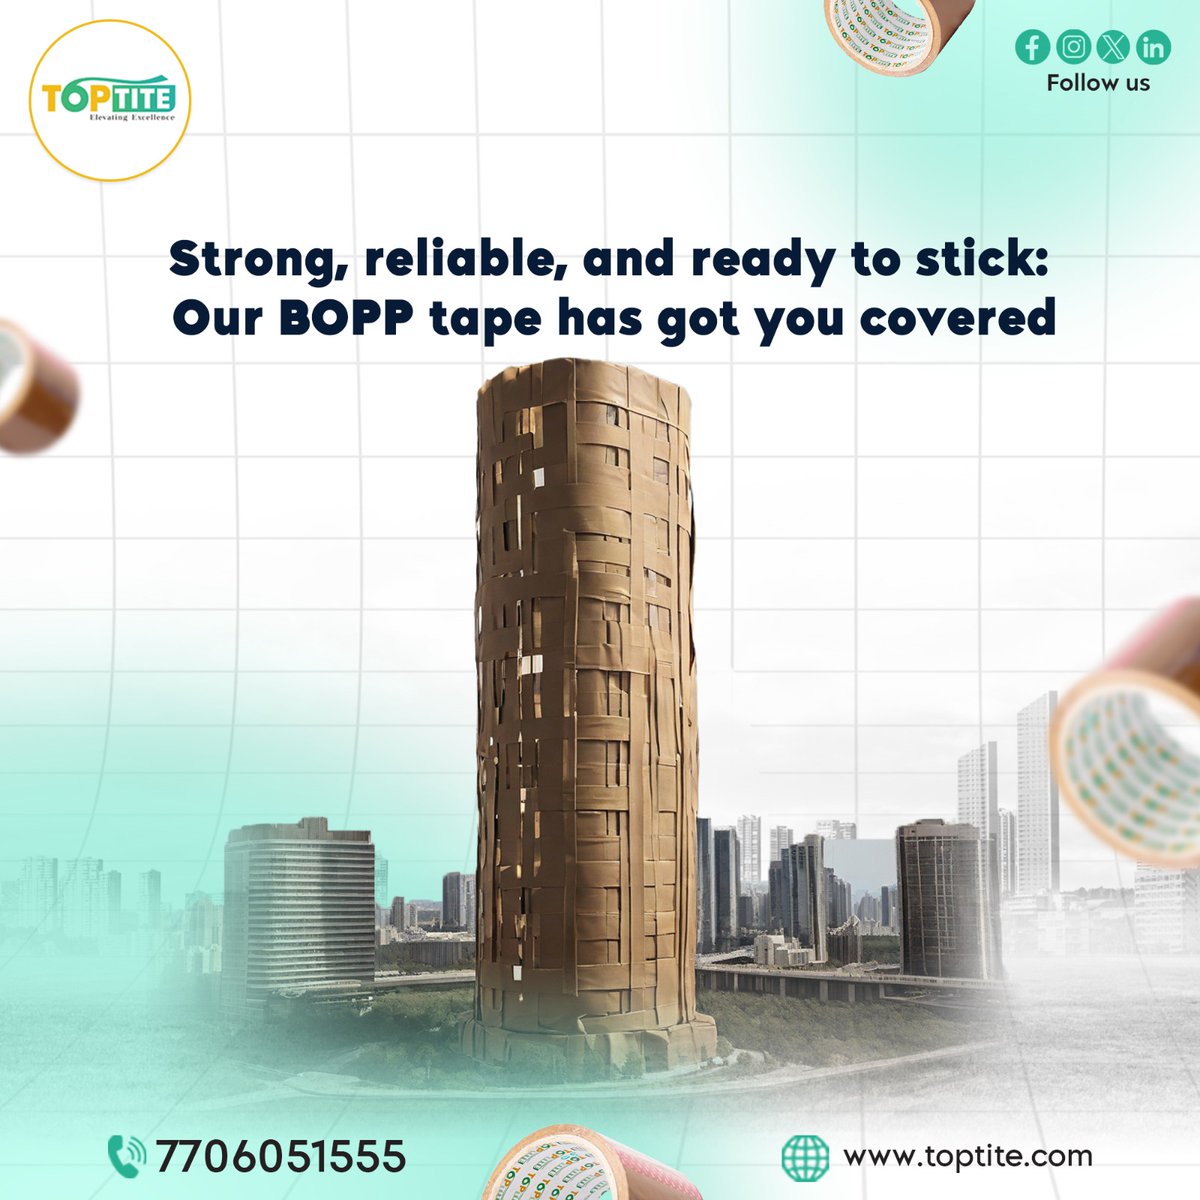 Strong, reliable, and ready to stick: Our BOPP tape has got you covered. 
.
.
#browntape #HighQuality #transparenttape #wrappinggifts #tapemanufacturer #Reliability #packagingtape #strongadhesive #waterprooftape #giftwrapping #QualityAdhesive #besttape #BOPPTapes #toptite